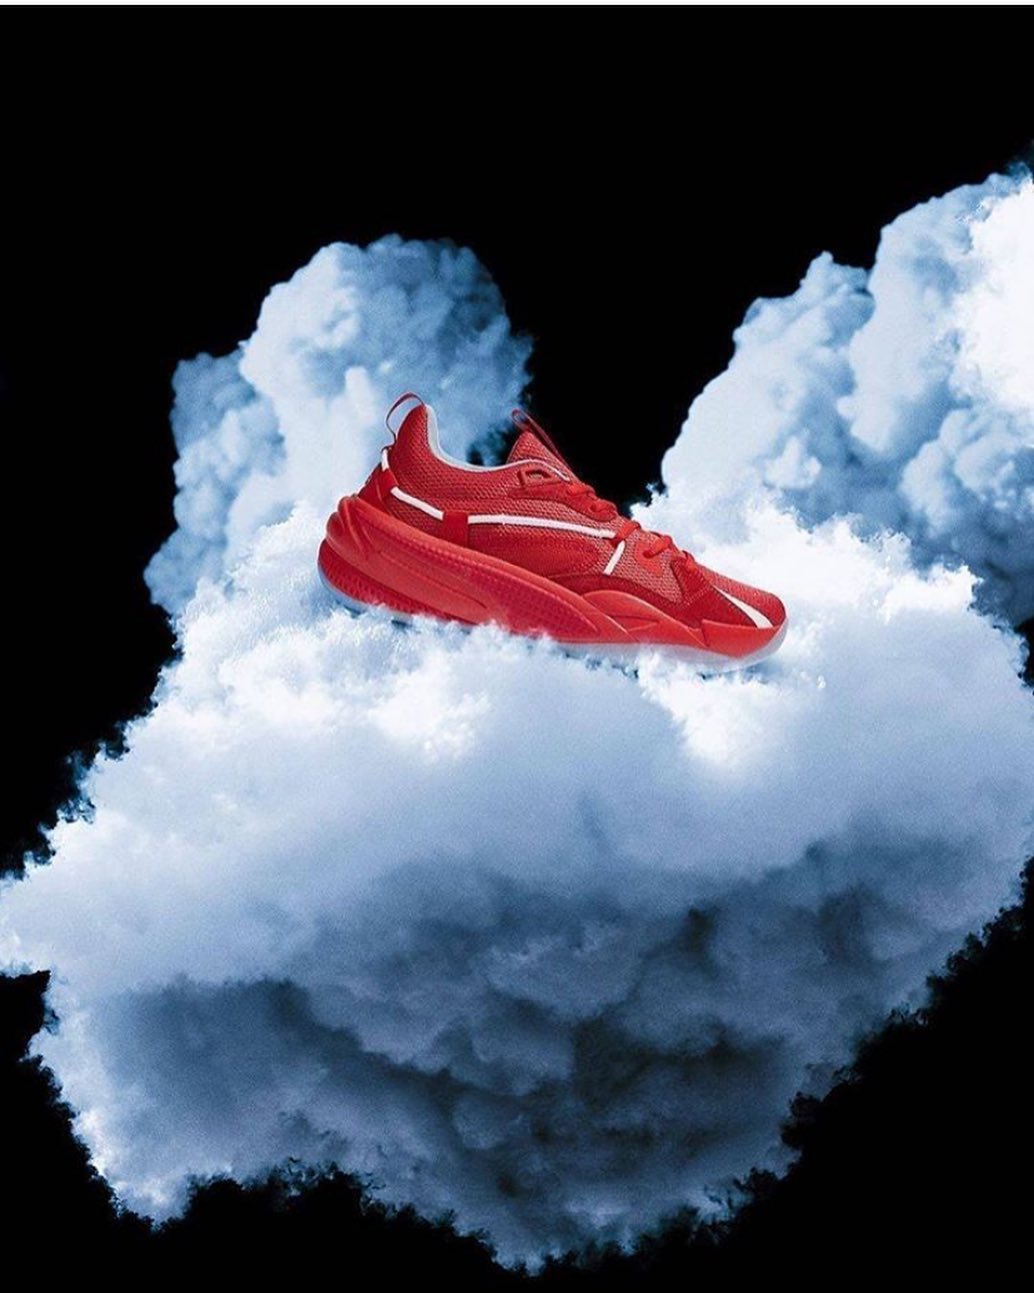 Foot Locker ME - #DUBAI
Your dreams may be in the clouds, but the road up is paved in the @realcoleworld x @pumahoops RS-Dreamer Blood, Sweat & Tears. Exclusively available at #FootLockerMidldleEast f...